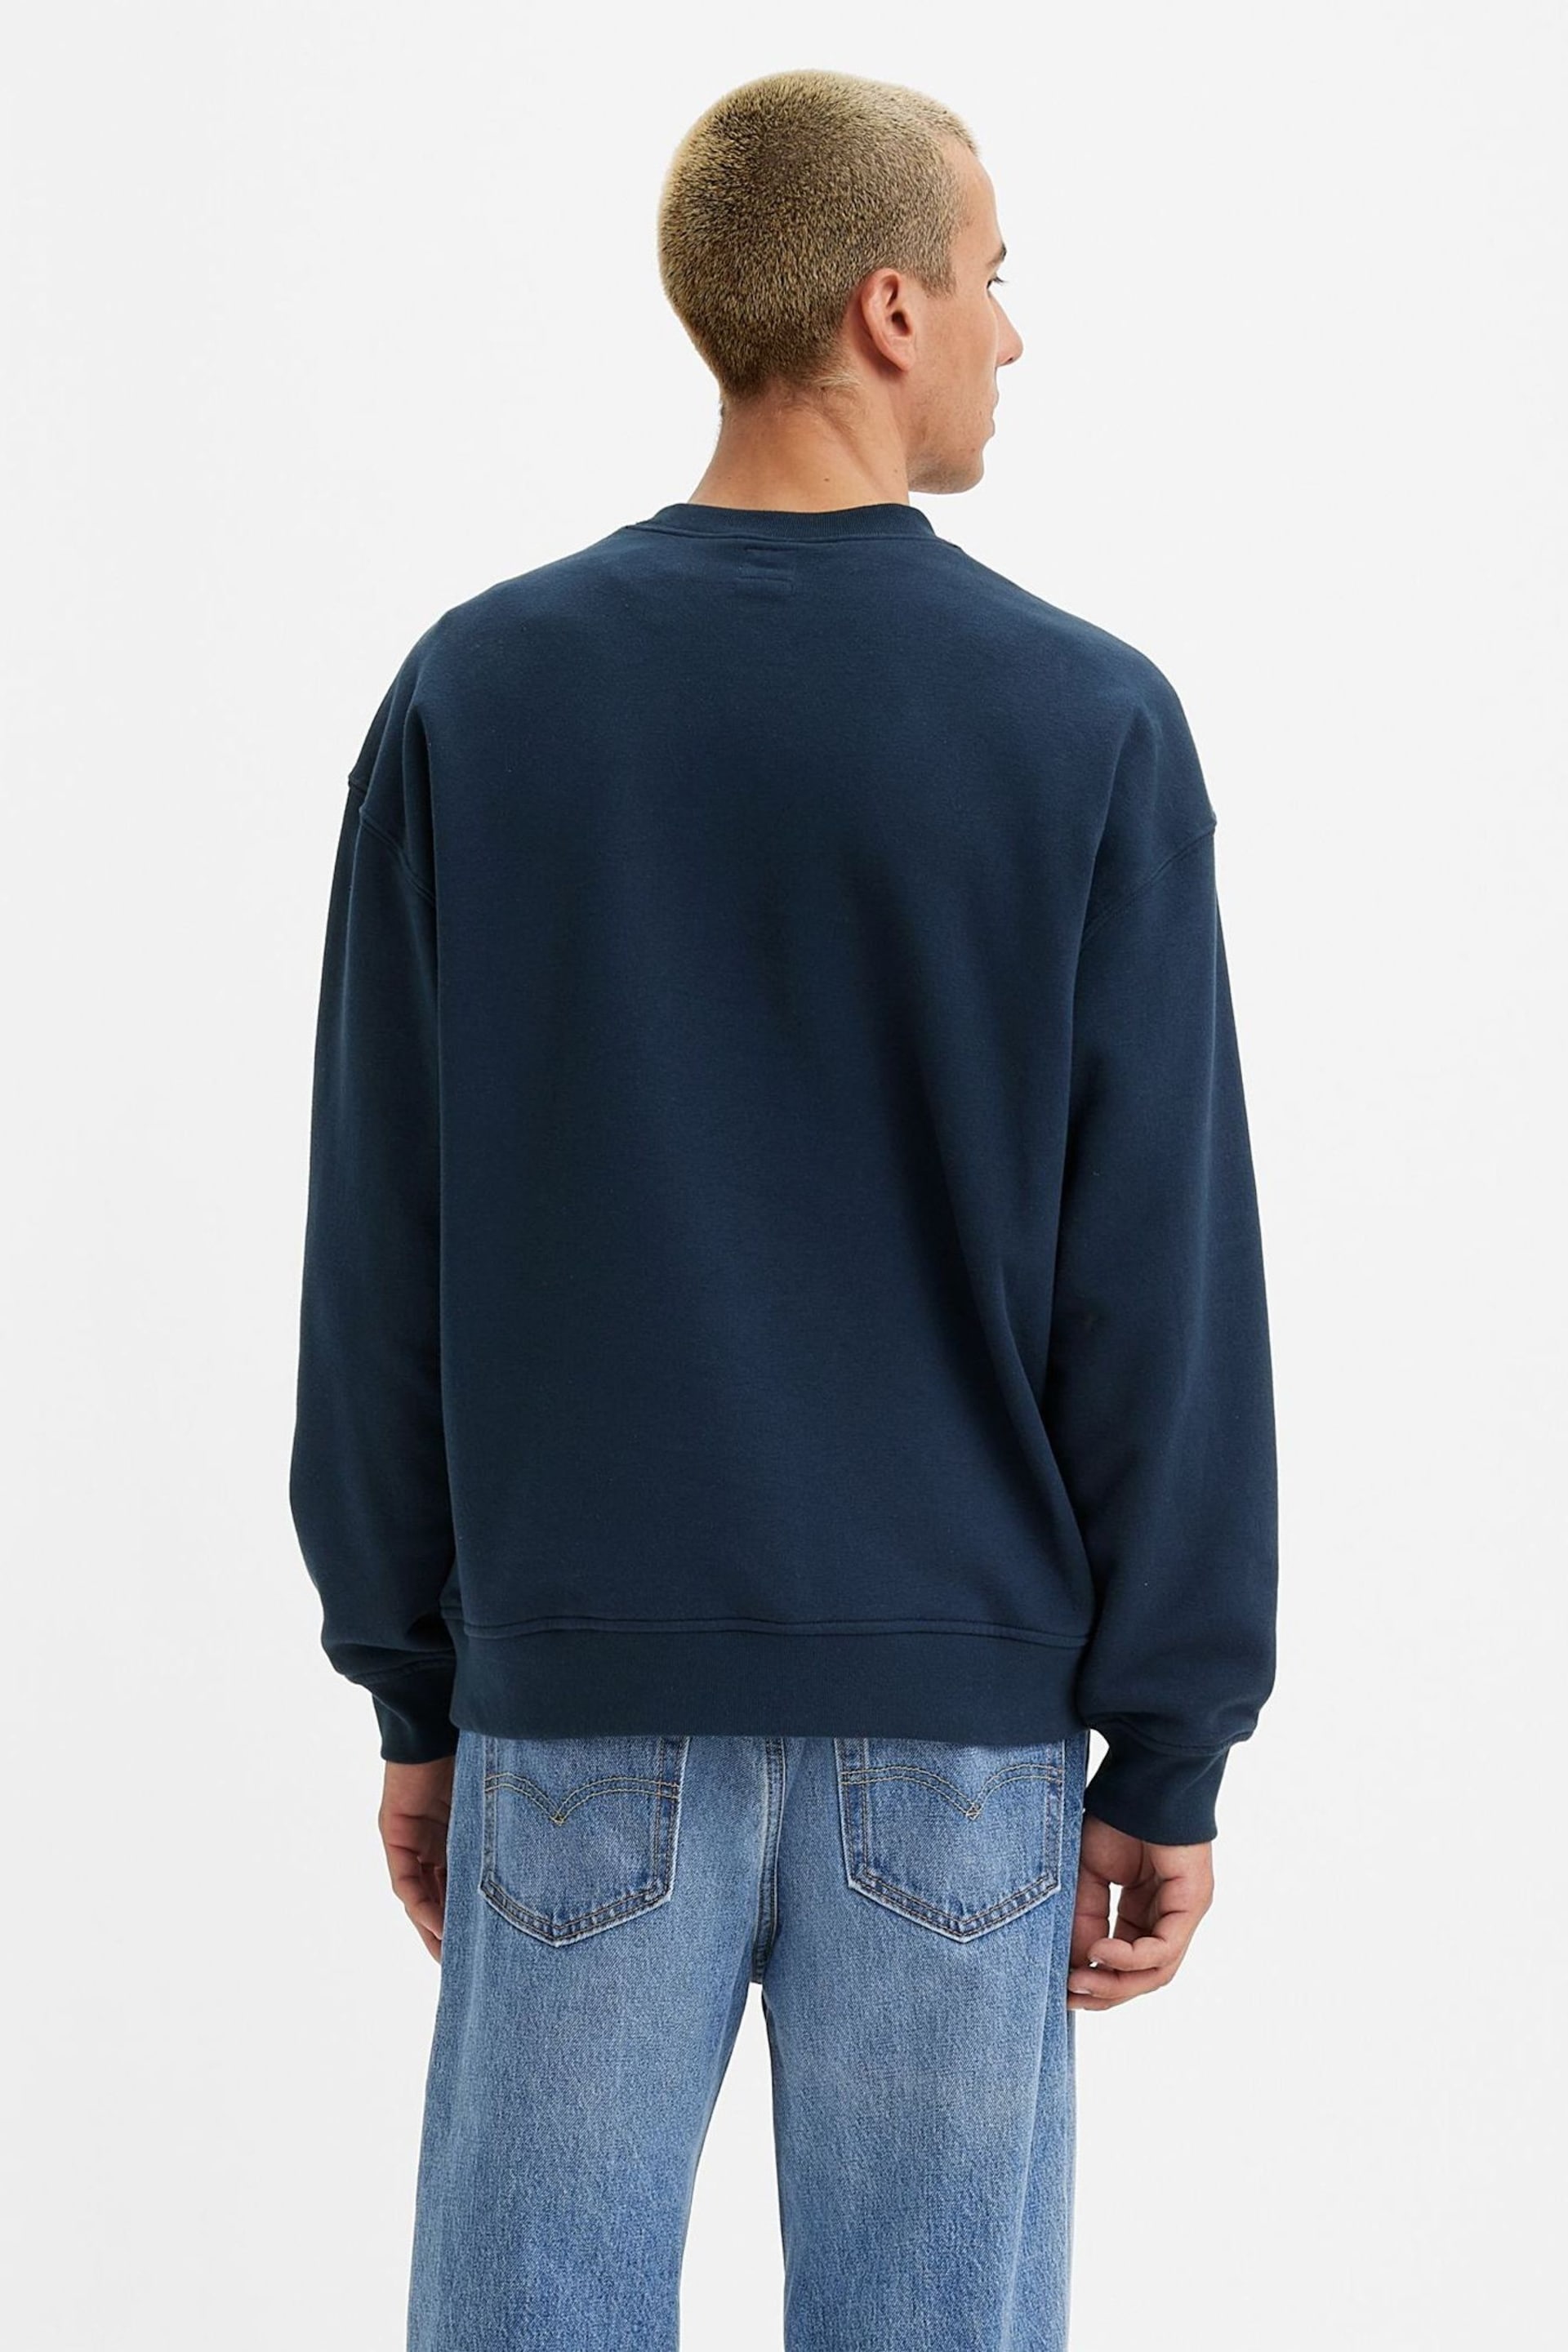 Levi's® Blue Relaxed Baby Tab  Sweatshirt - Image 2 of 5